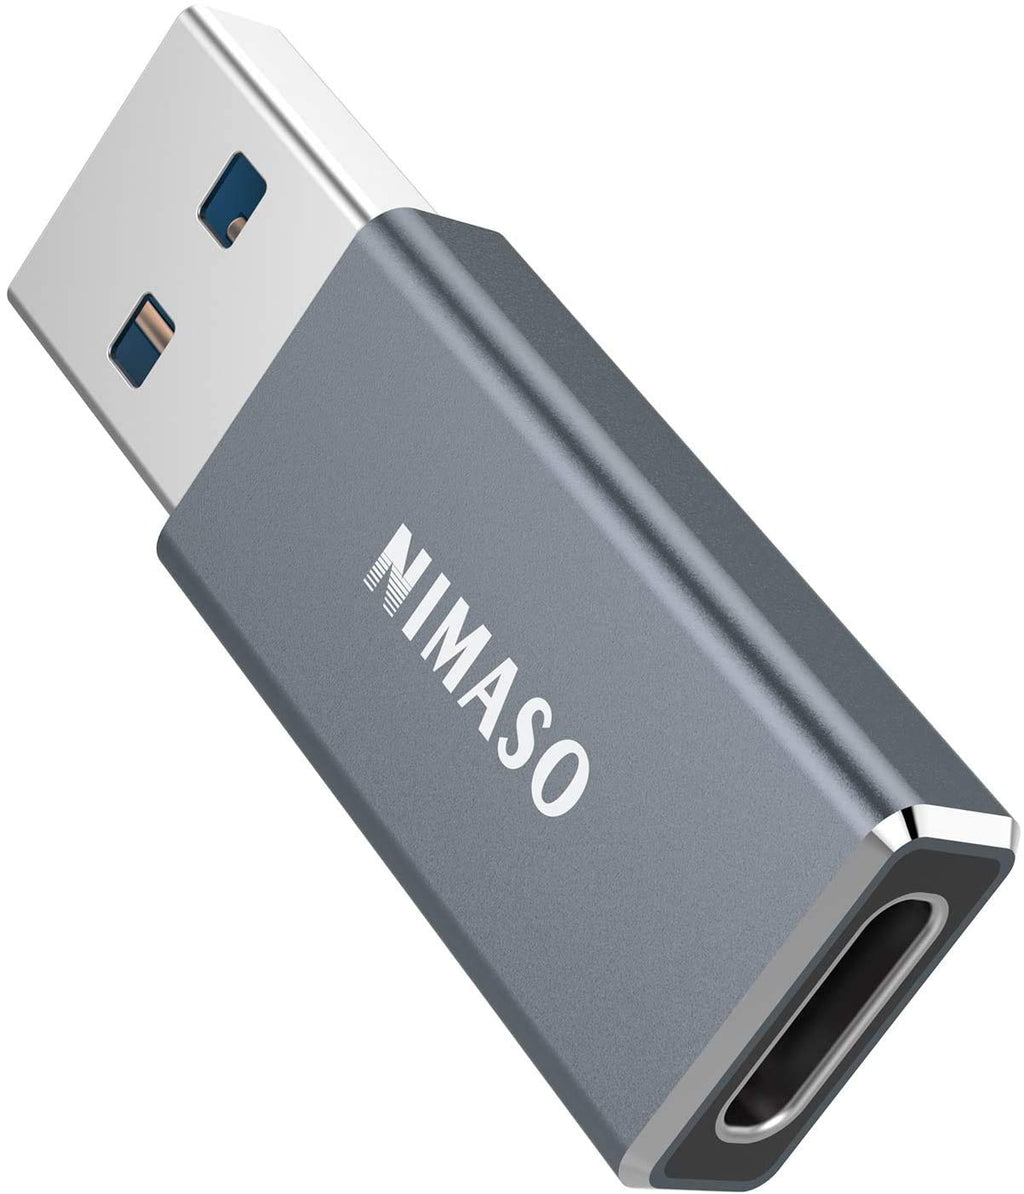  [AUSTRALIA] - NIMASO USB C Female to USB Male Adapter 5Gbps, Type C to USB A Charger Cable Adapter,Fast Charging Converter Compatible with Power Bank,Laptops,Chargers,Samsung S20 S20+ Note 10,Google Pixel. grey